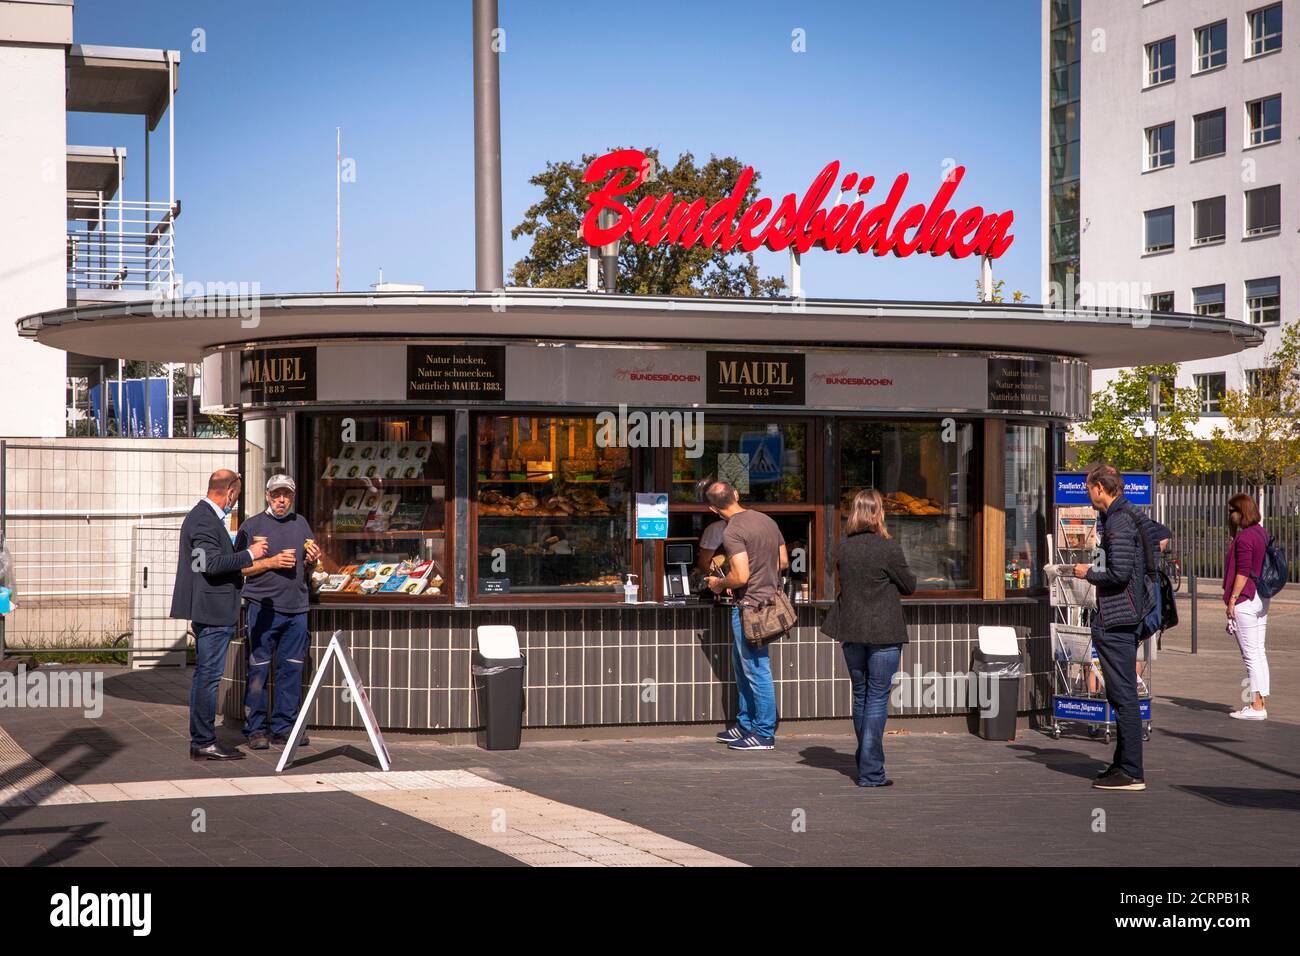 the Bundesbuedchen, historical newspaper kiosk in the former government district, Bonn, North Rhine-Westphalia, Germany.  das Bundesbuedchen, historis Stock Photo